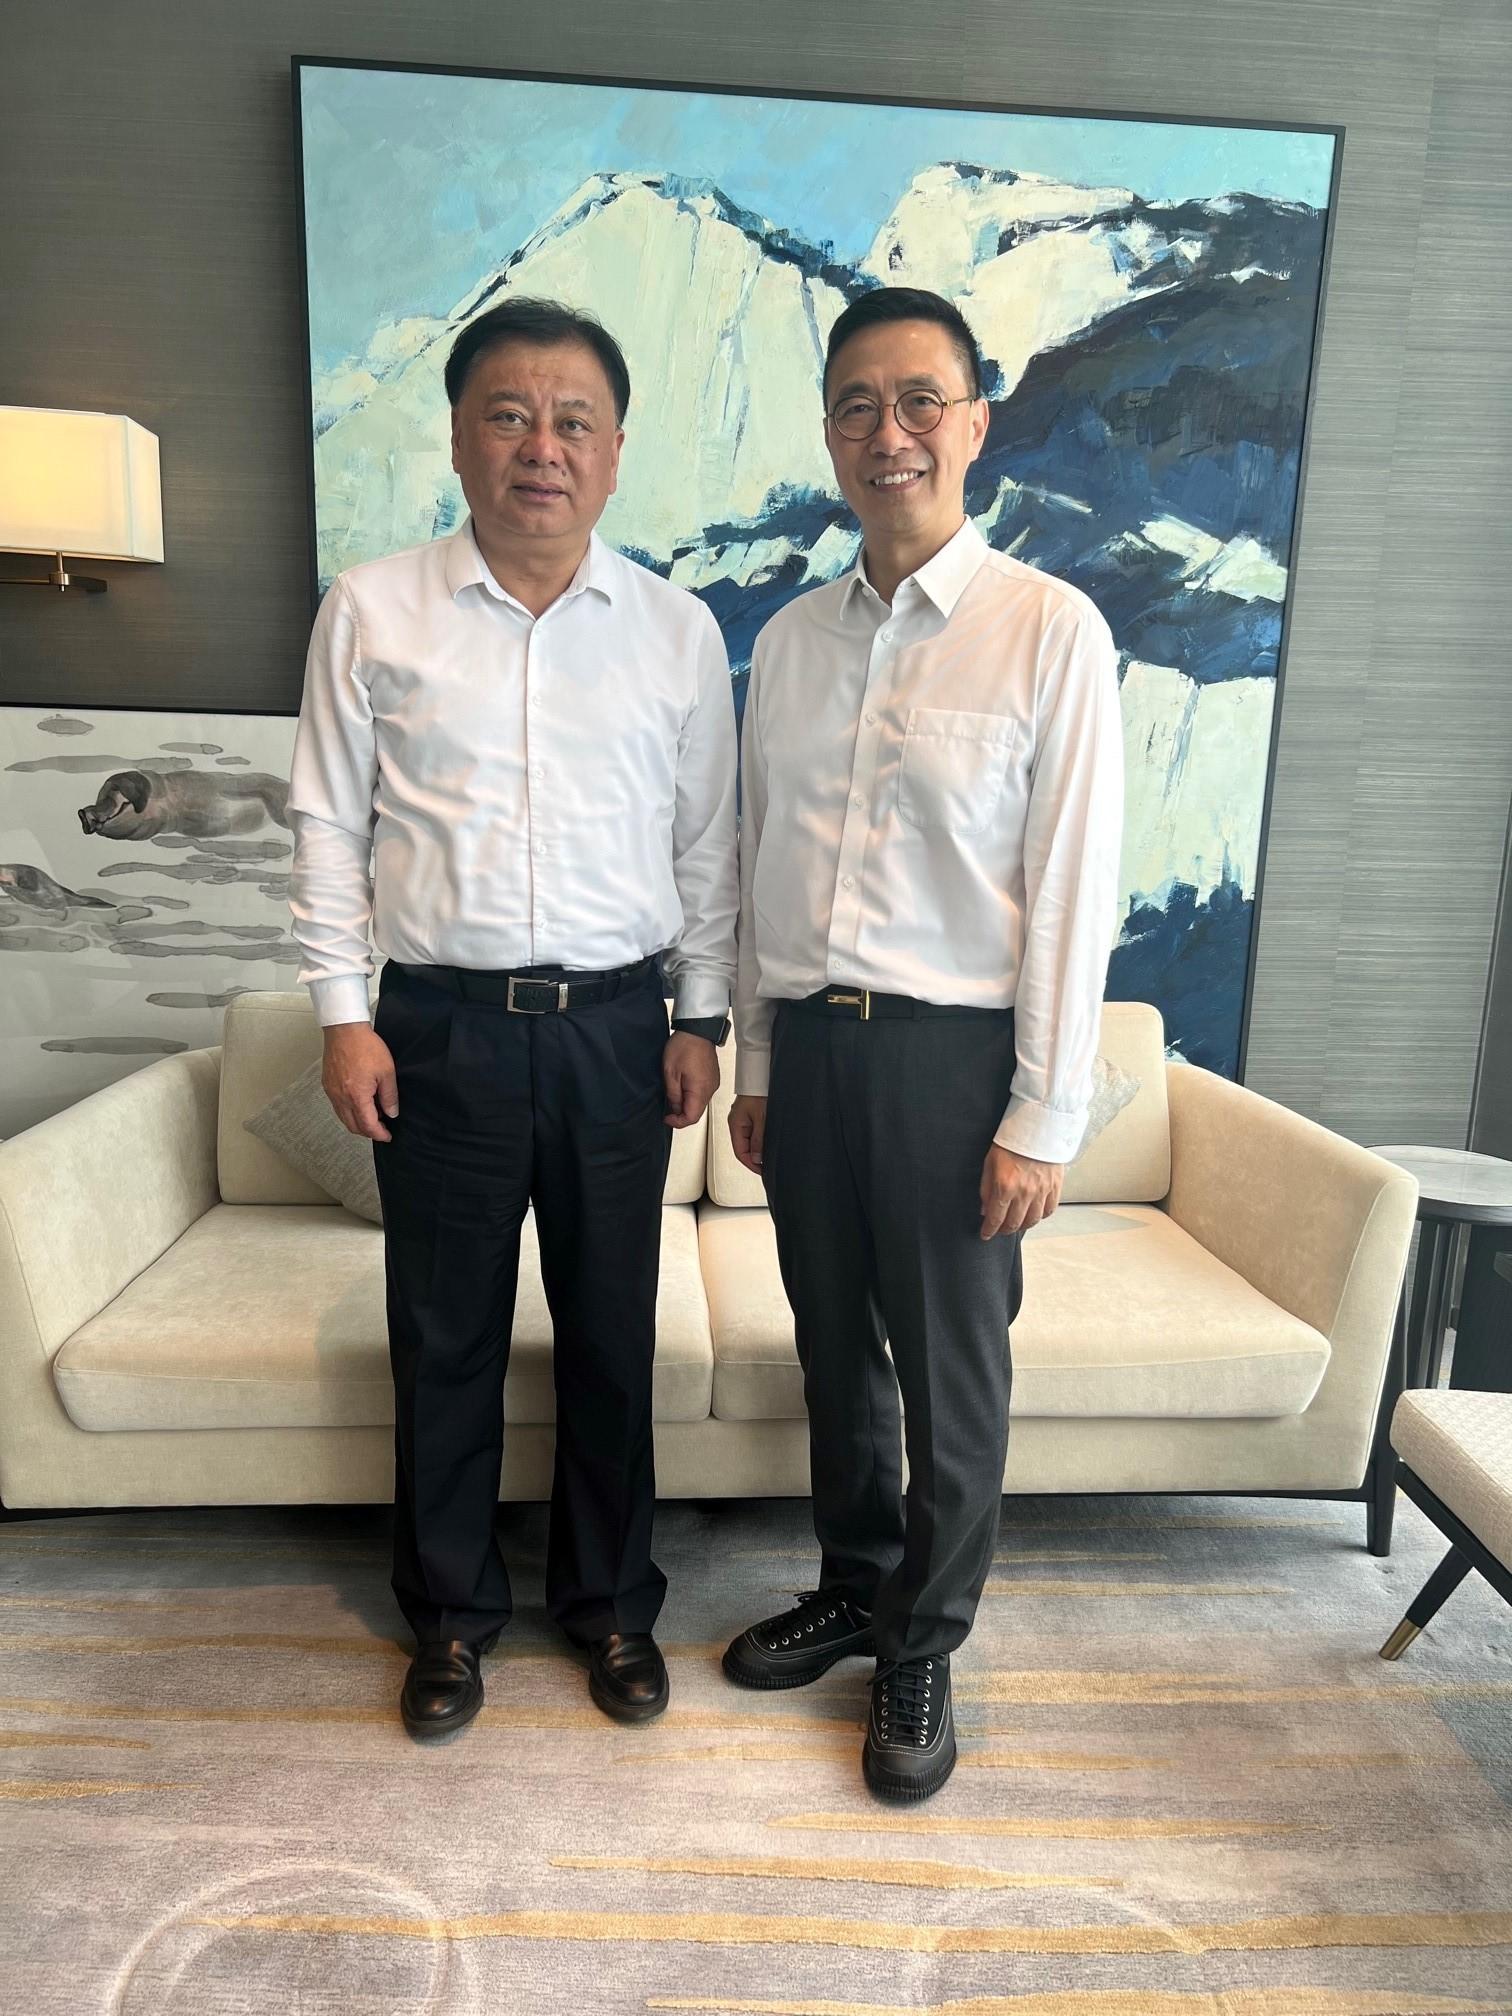 The Secretary for Culture, Sports and Tourism, Mr Kevin Yeung (right), today (July 31) met with Deputy Director of the Zhejiang Provincial Department of Culture and Tourism Mr Xu Peng (left), in Hangzhou. They discussed ways to deepen cultural and tourism collaboration between Zhejiang and Hong Kong.